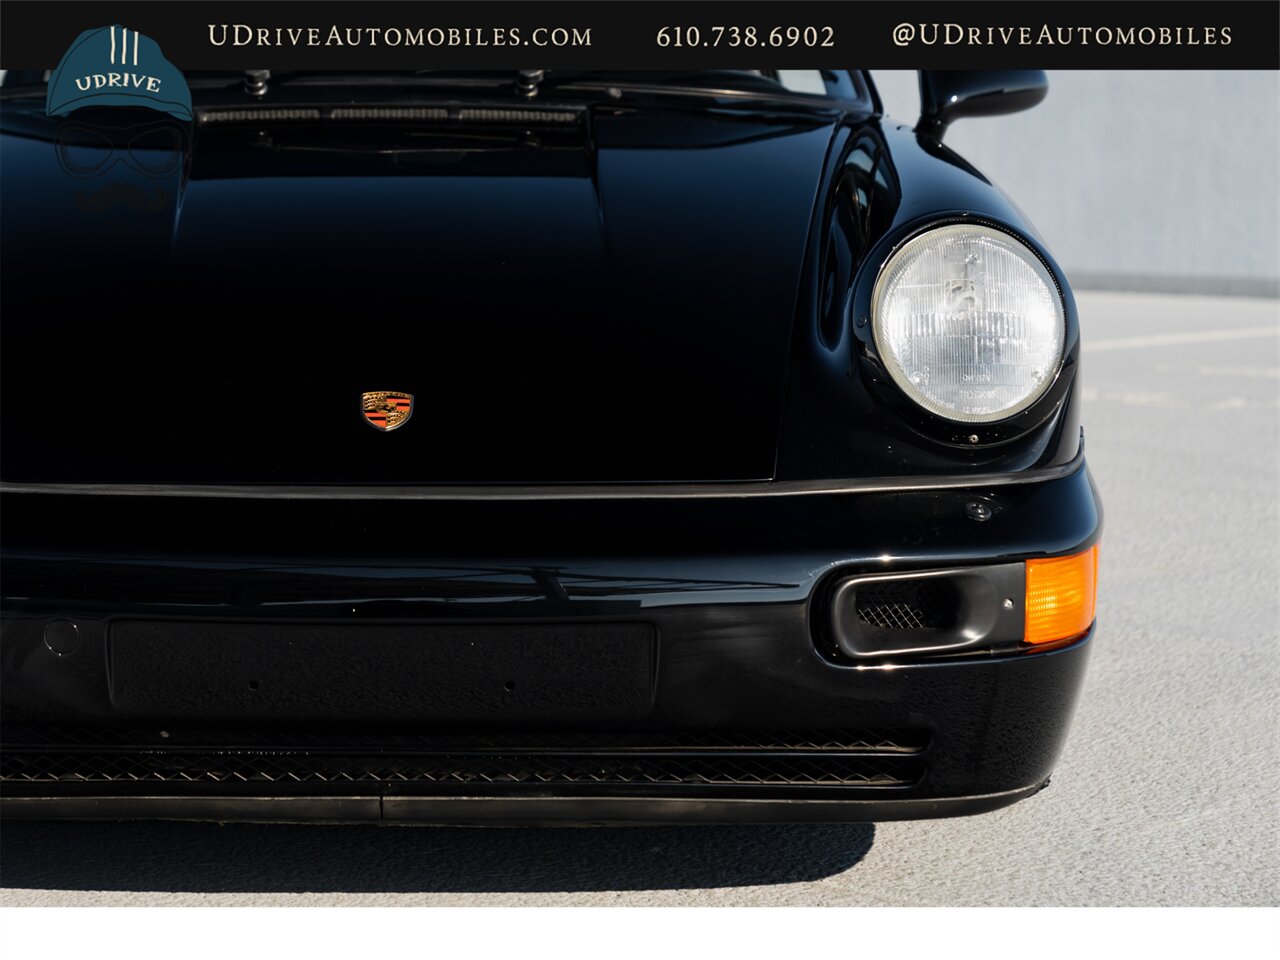 1989 Porsche 911 C4  964 Carrera 4 C4 5 Speed Manual $33k in Recent Service History - Photo 13 - West Chester, PA 19382